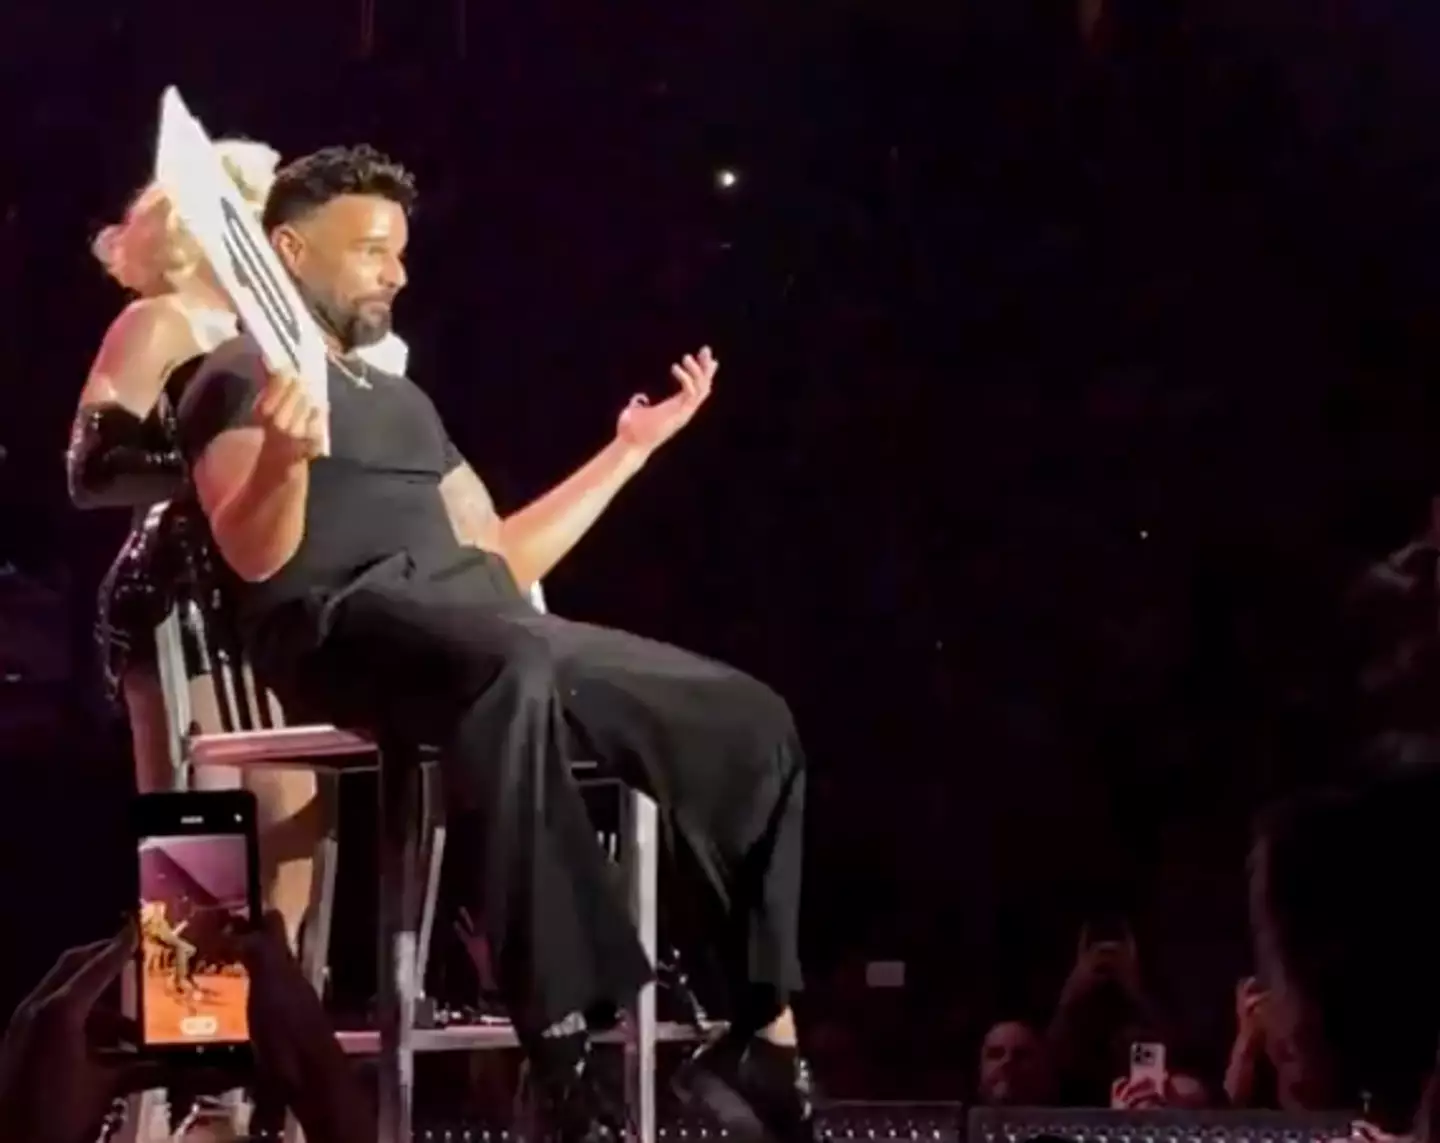 The bulge seemed to appear after the performance. X/@ricky_martin